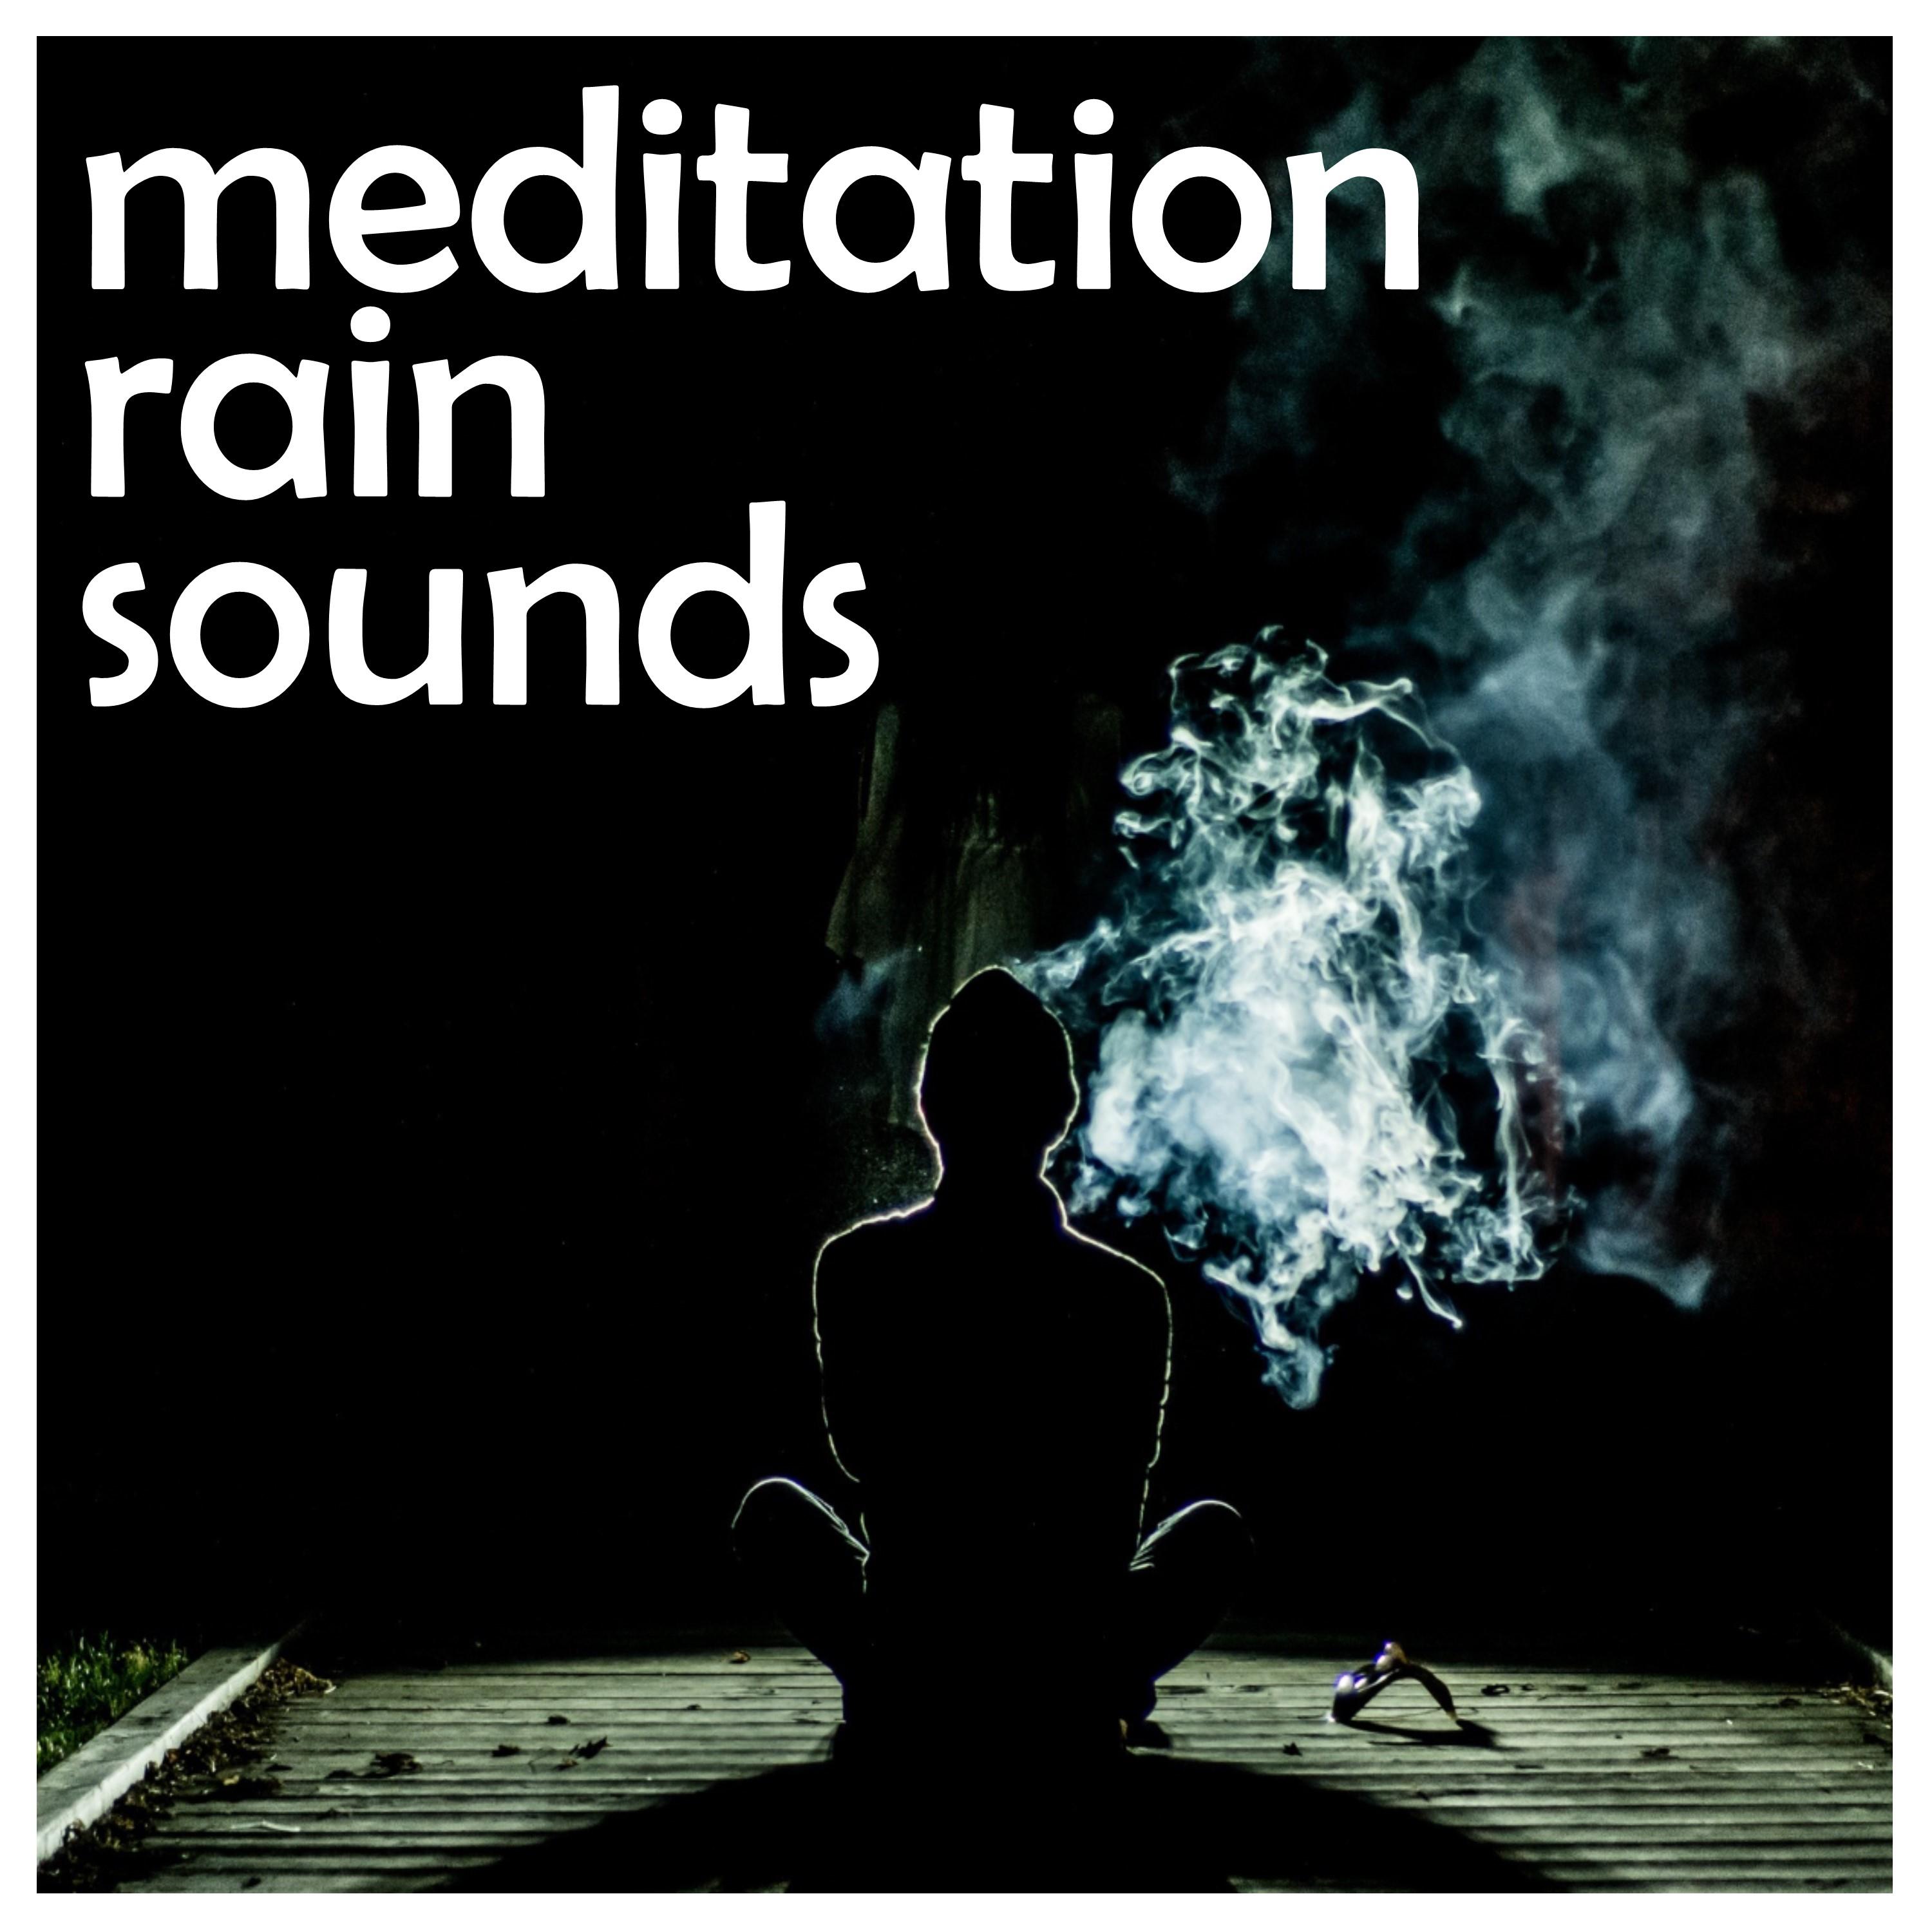 #18 Meditation and Sleep Rain Sounds - Loopable, Relaxing, Soothing Sounds